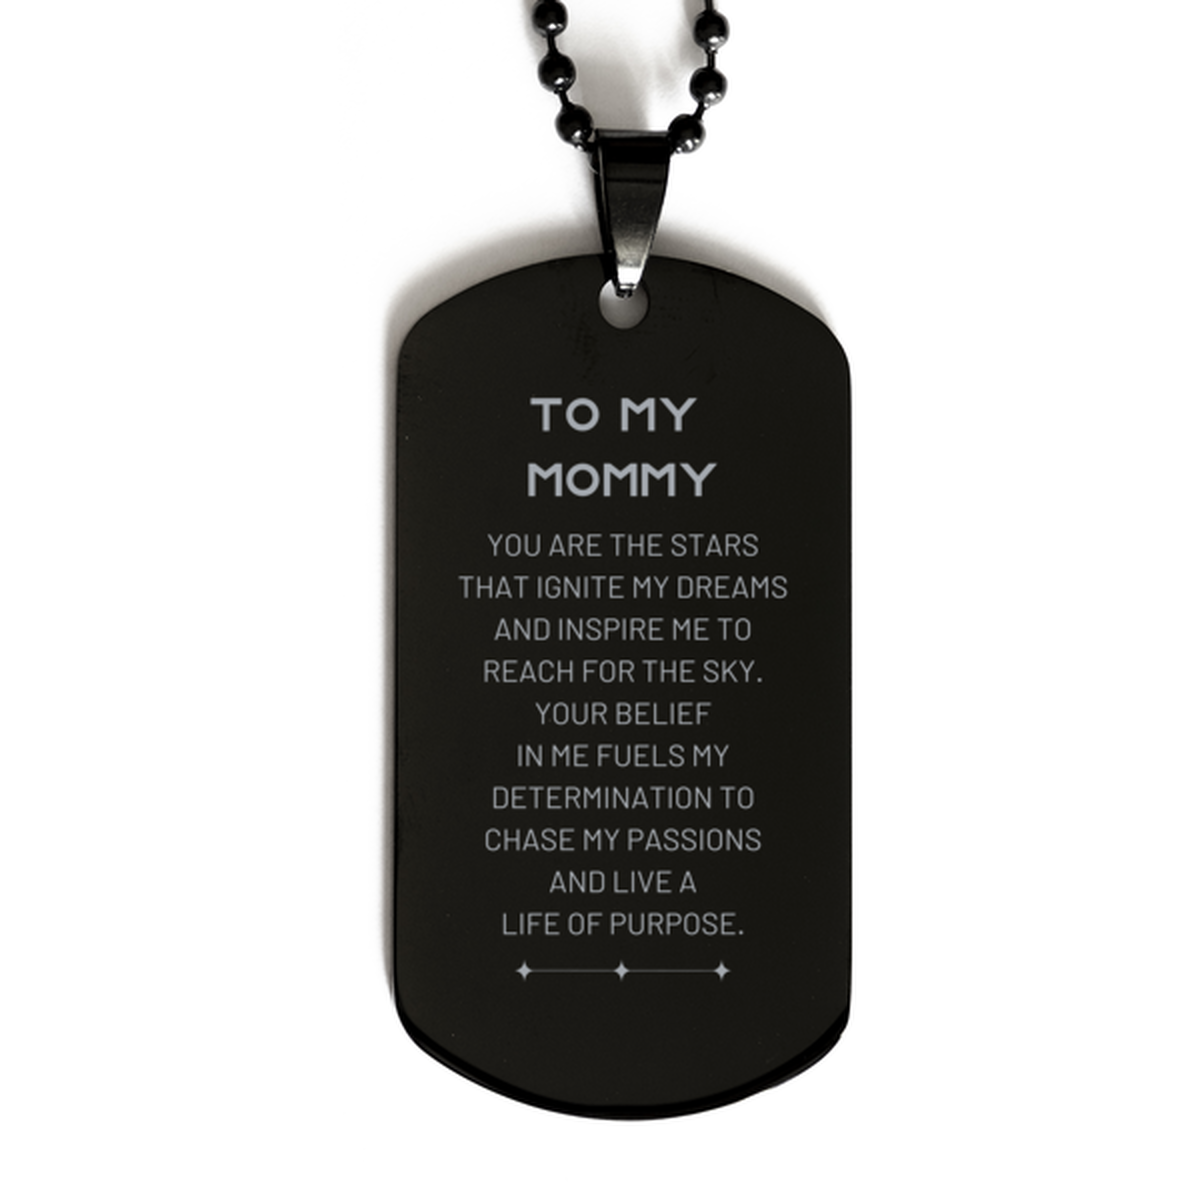 To My Mommy Black Dog Tag, You are the stars that ignite my dreams and inspire me to reach for the sky, Birthday Unique Gifts For Mommy, Thank You Gifts For Mommy